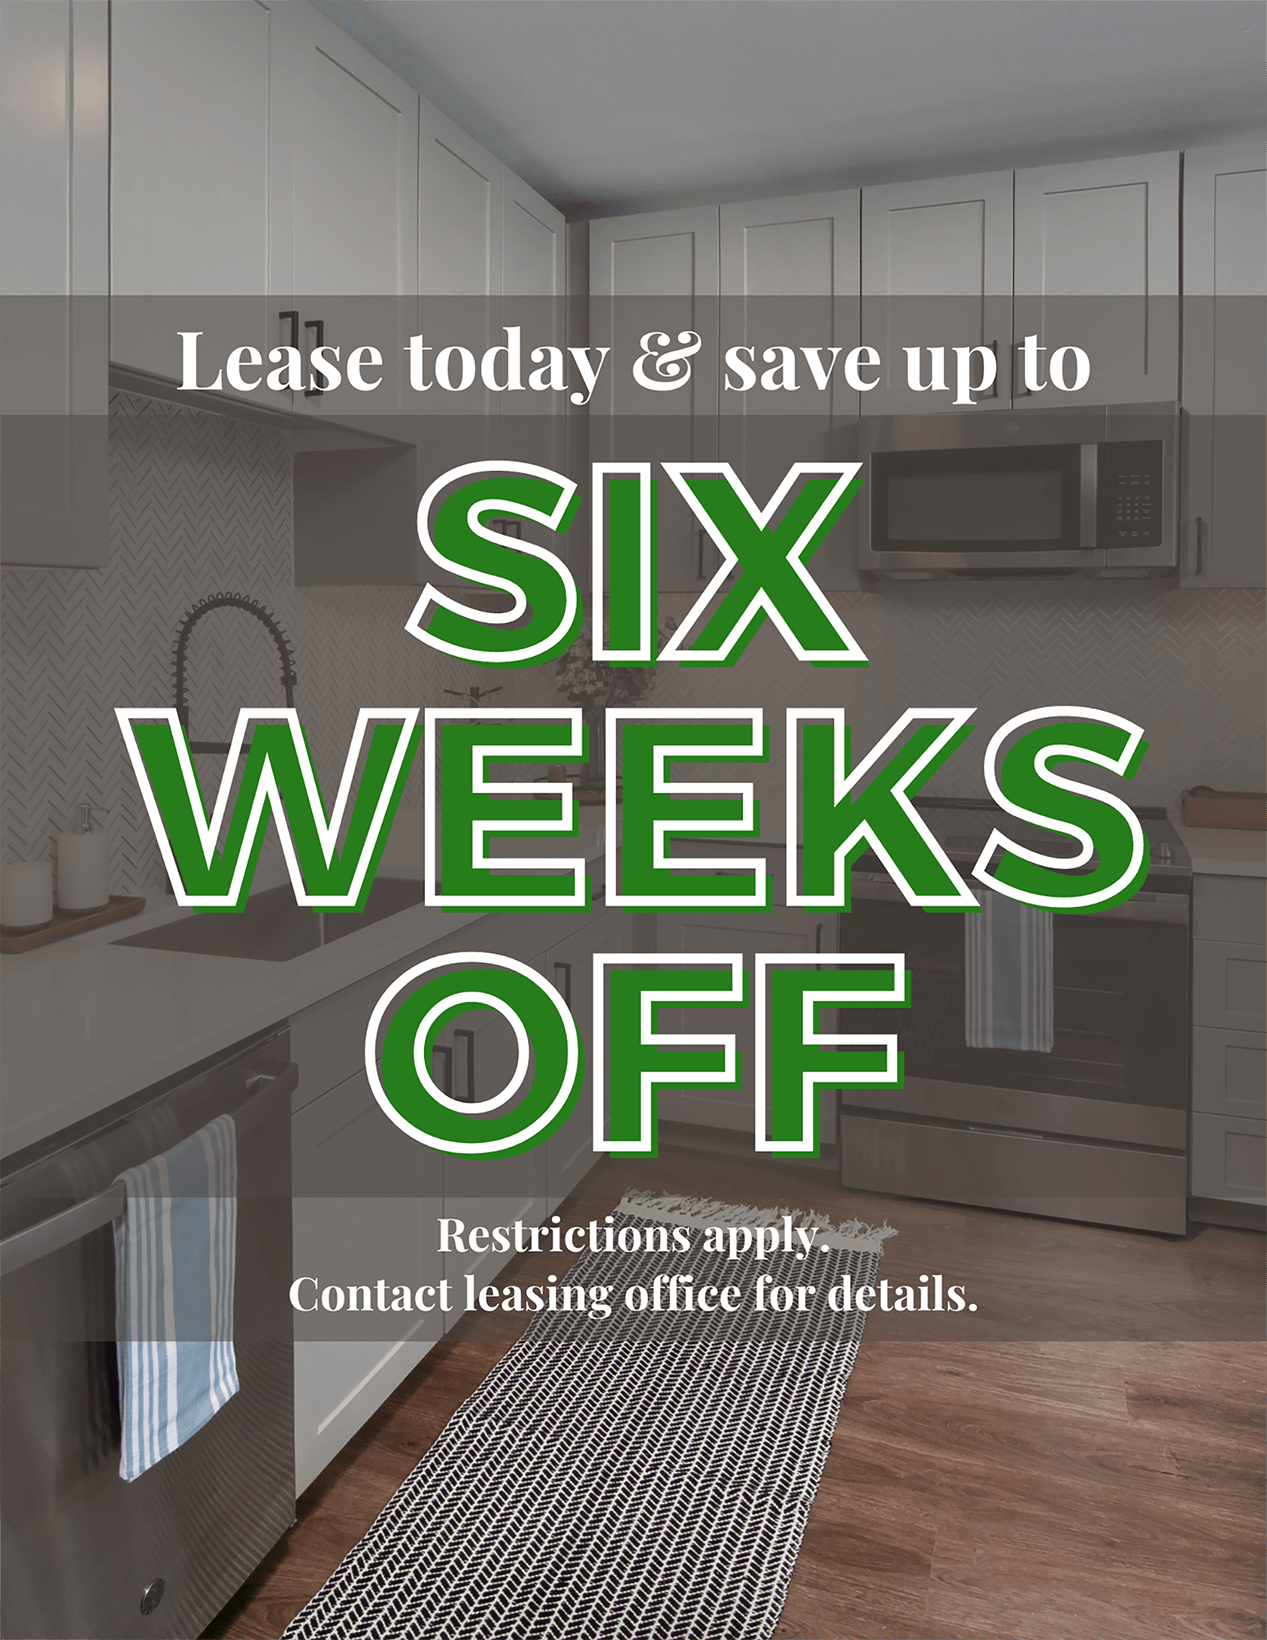 Get up to six weeks off lease today and save!